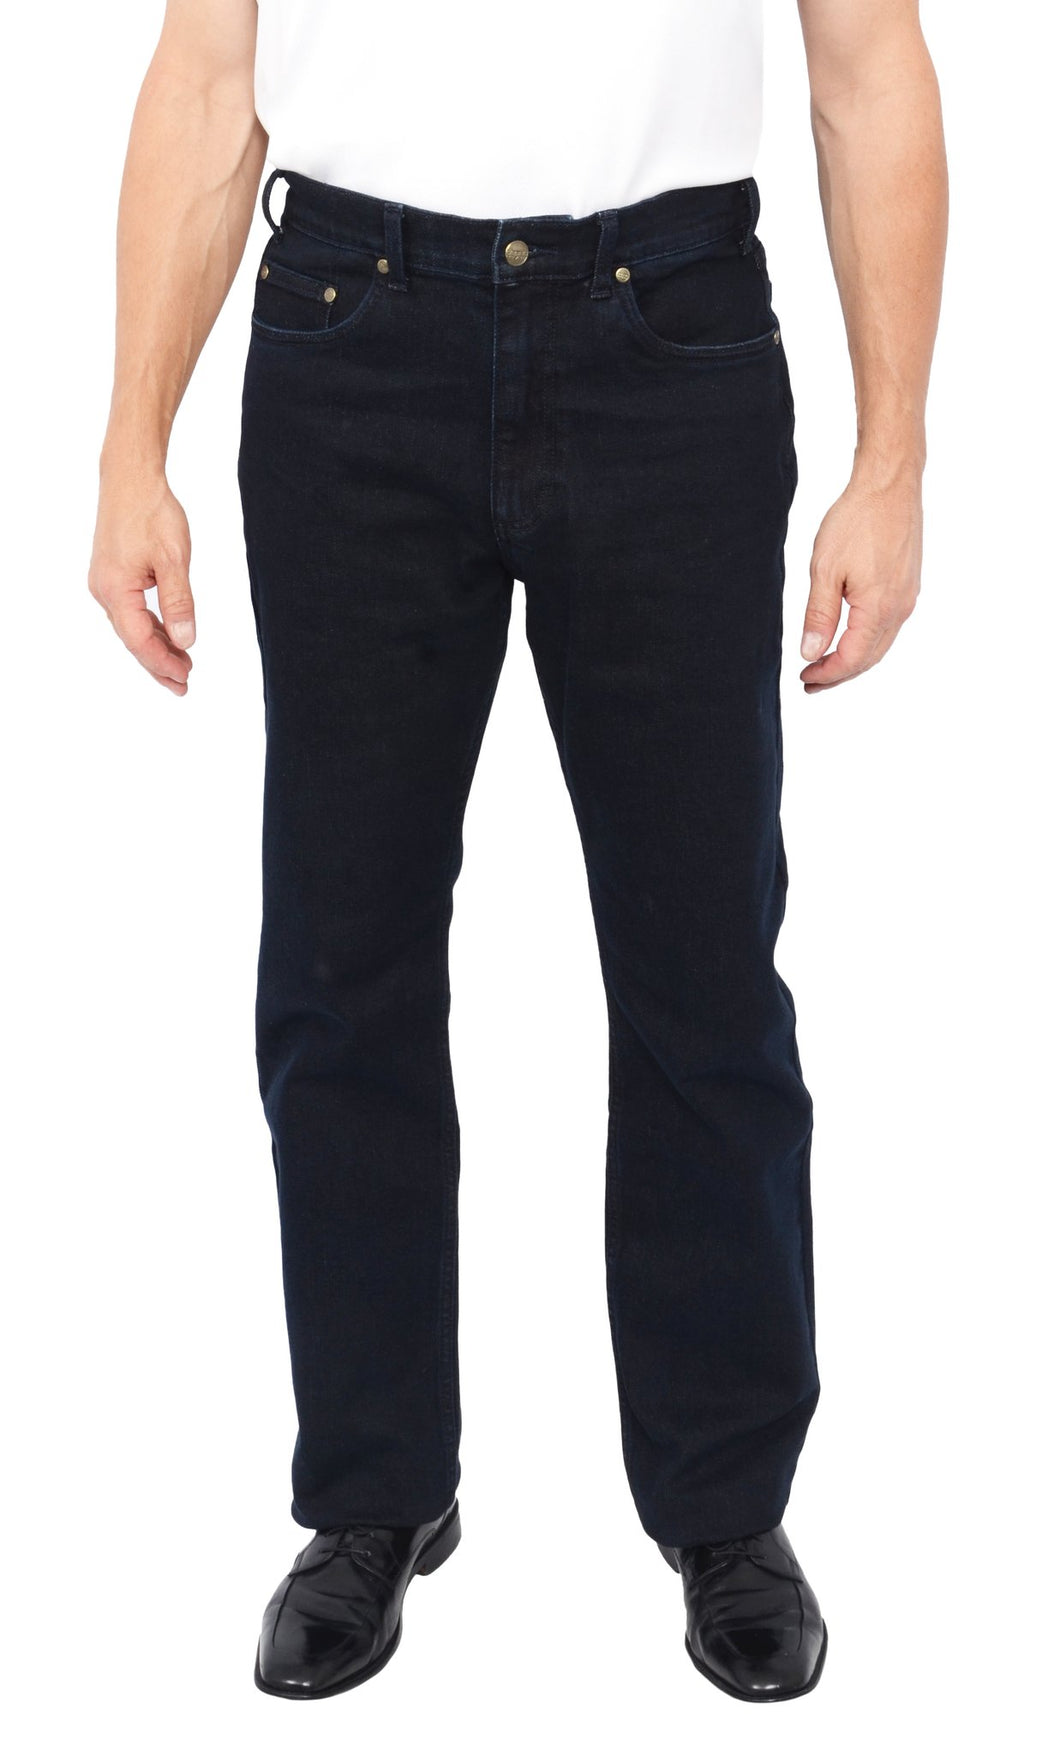 The new Midnight Jean in our Stretch Traditional Straight Cut Style has a traditional fit and tapered leg for a slimmer fit. Featuring a boot cut and a stone wash for just the right amount of style, these jeans stretch 2% in the waist, seat and thigh, allowing for maximum comfort. This classic jean has a rise that is tailored to better fit your body, cutting out excess fabric hanging from the back seat and giving you better quality of comfort. Made from 12.5 oz. denim, 98% cotton and 2% stretch.